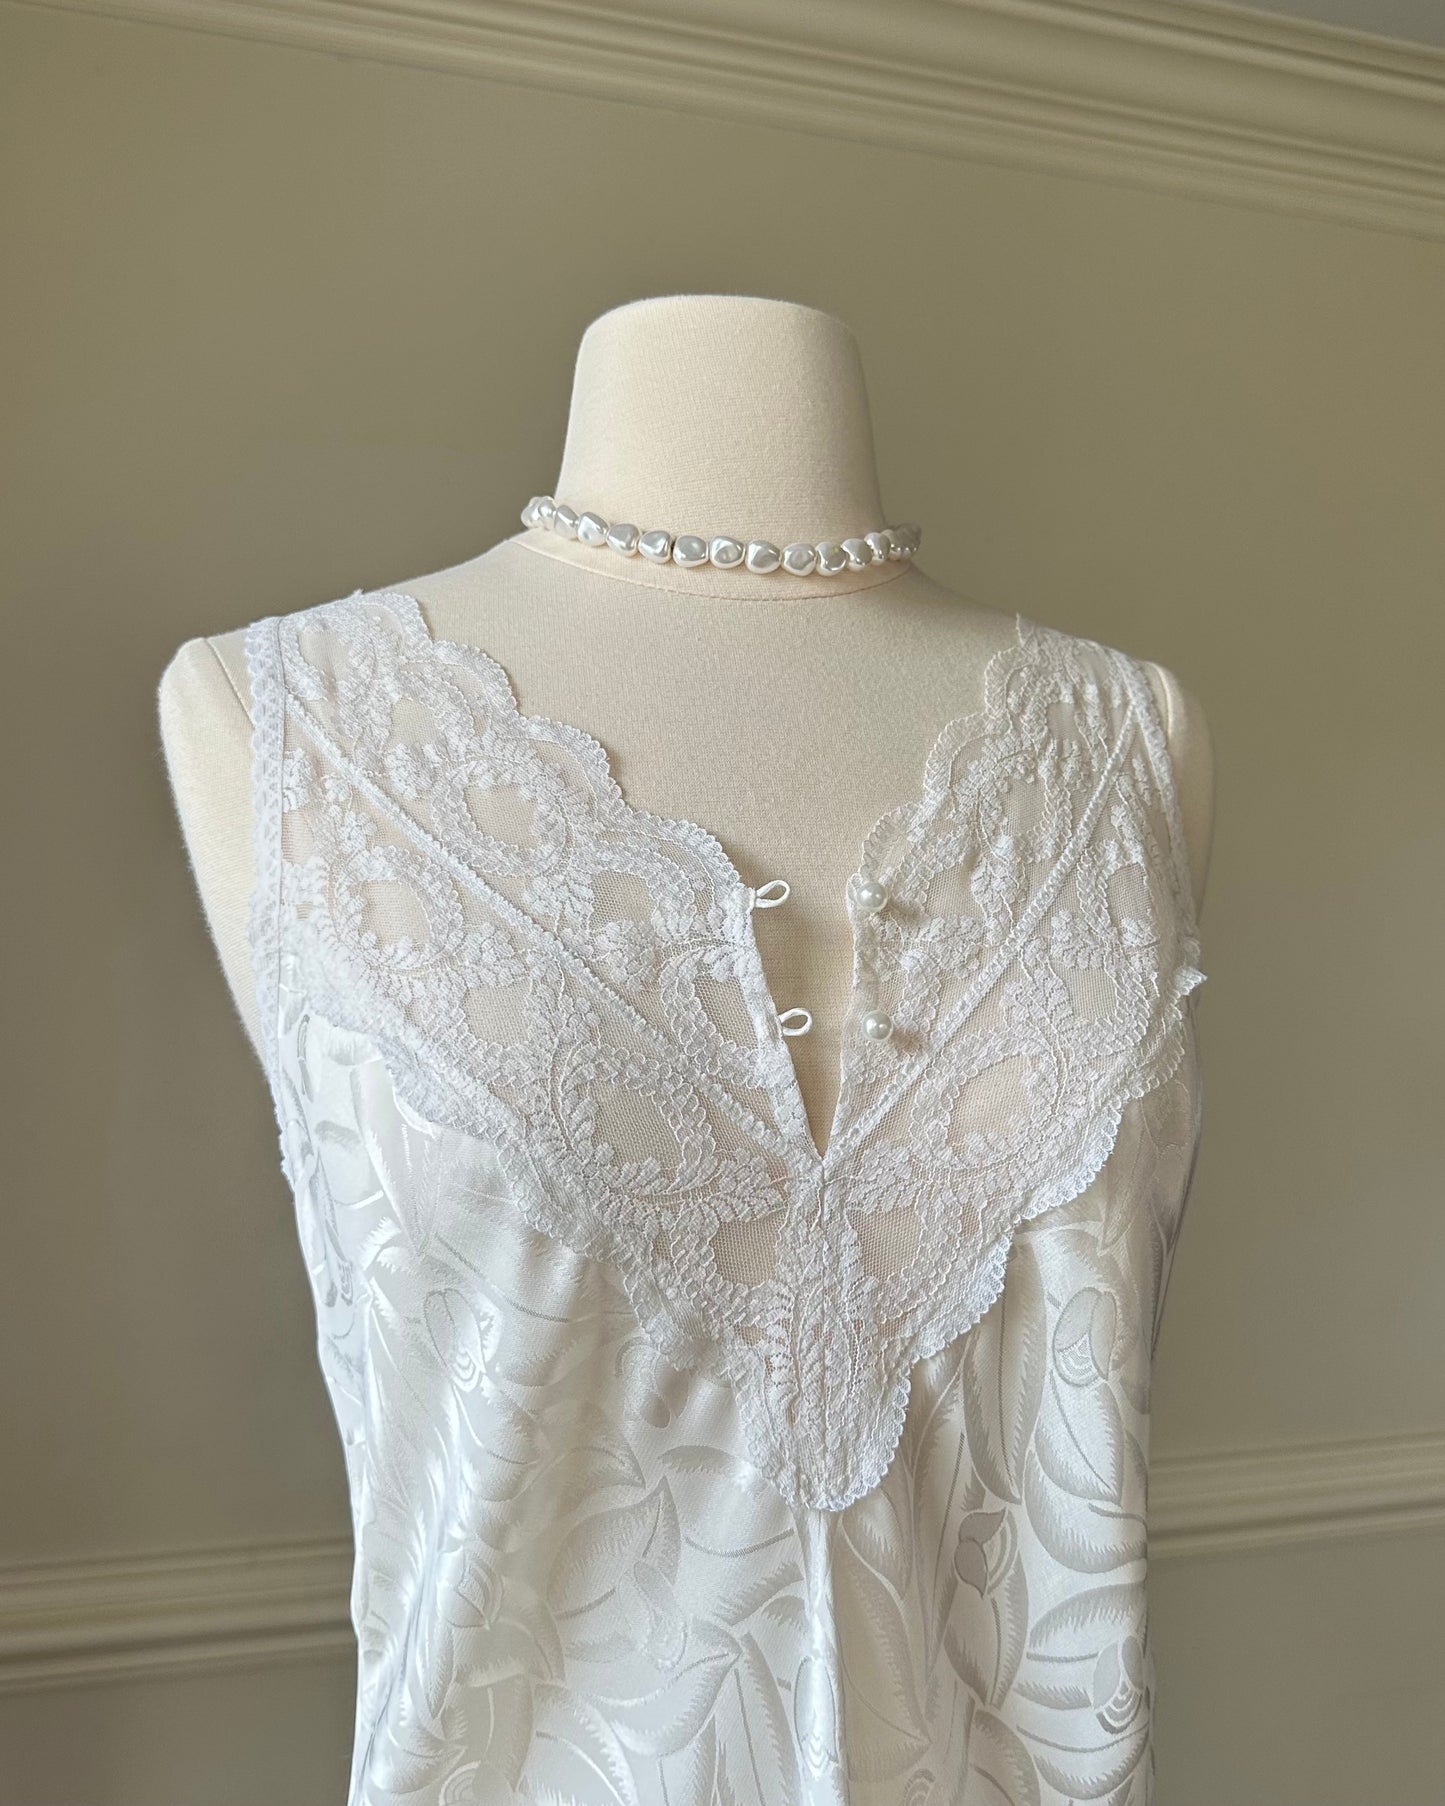 Vintage White Sleeveless Dress featuring Embossed Flowers With Lace Embroidery